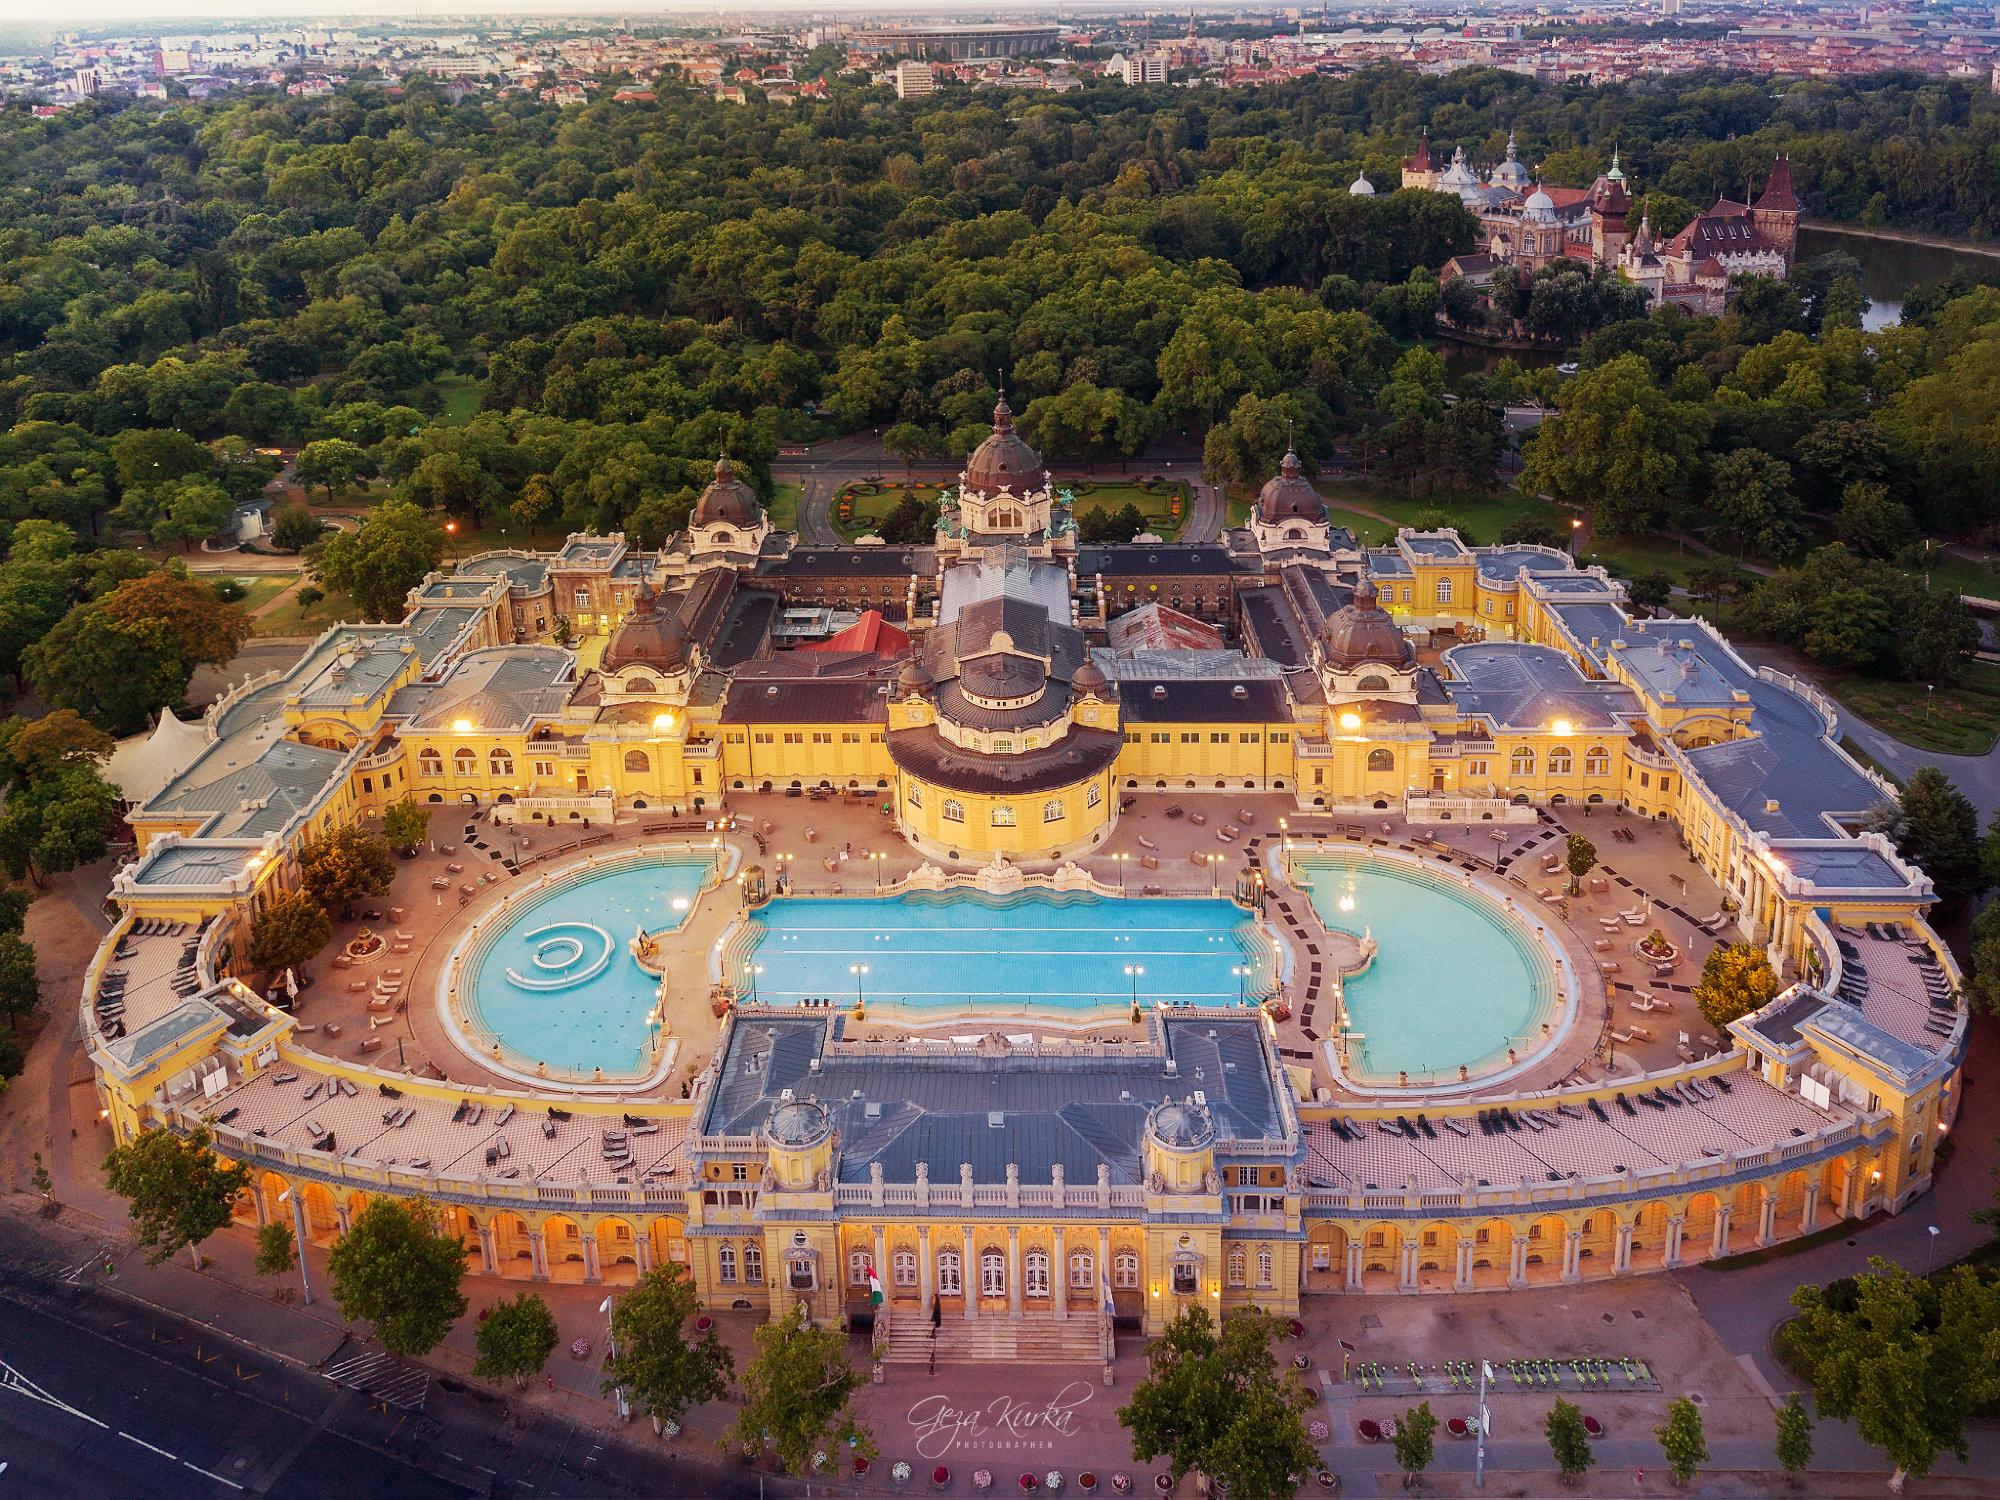 Why is the Széchenyi Spa so popular?